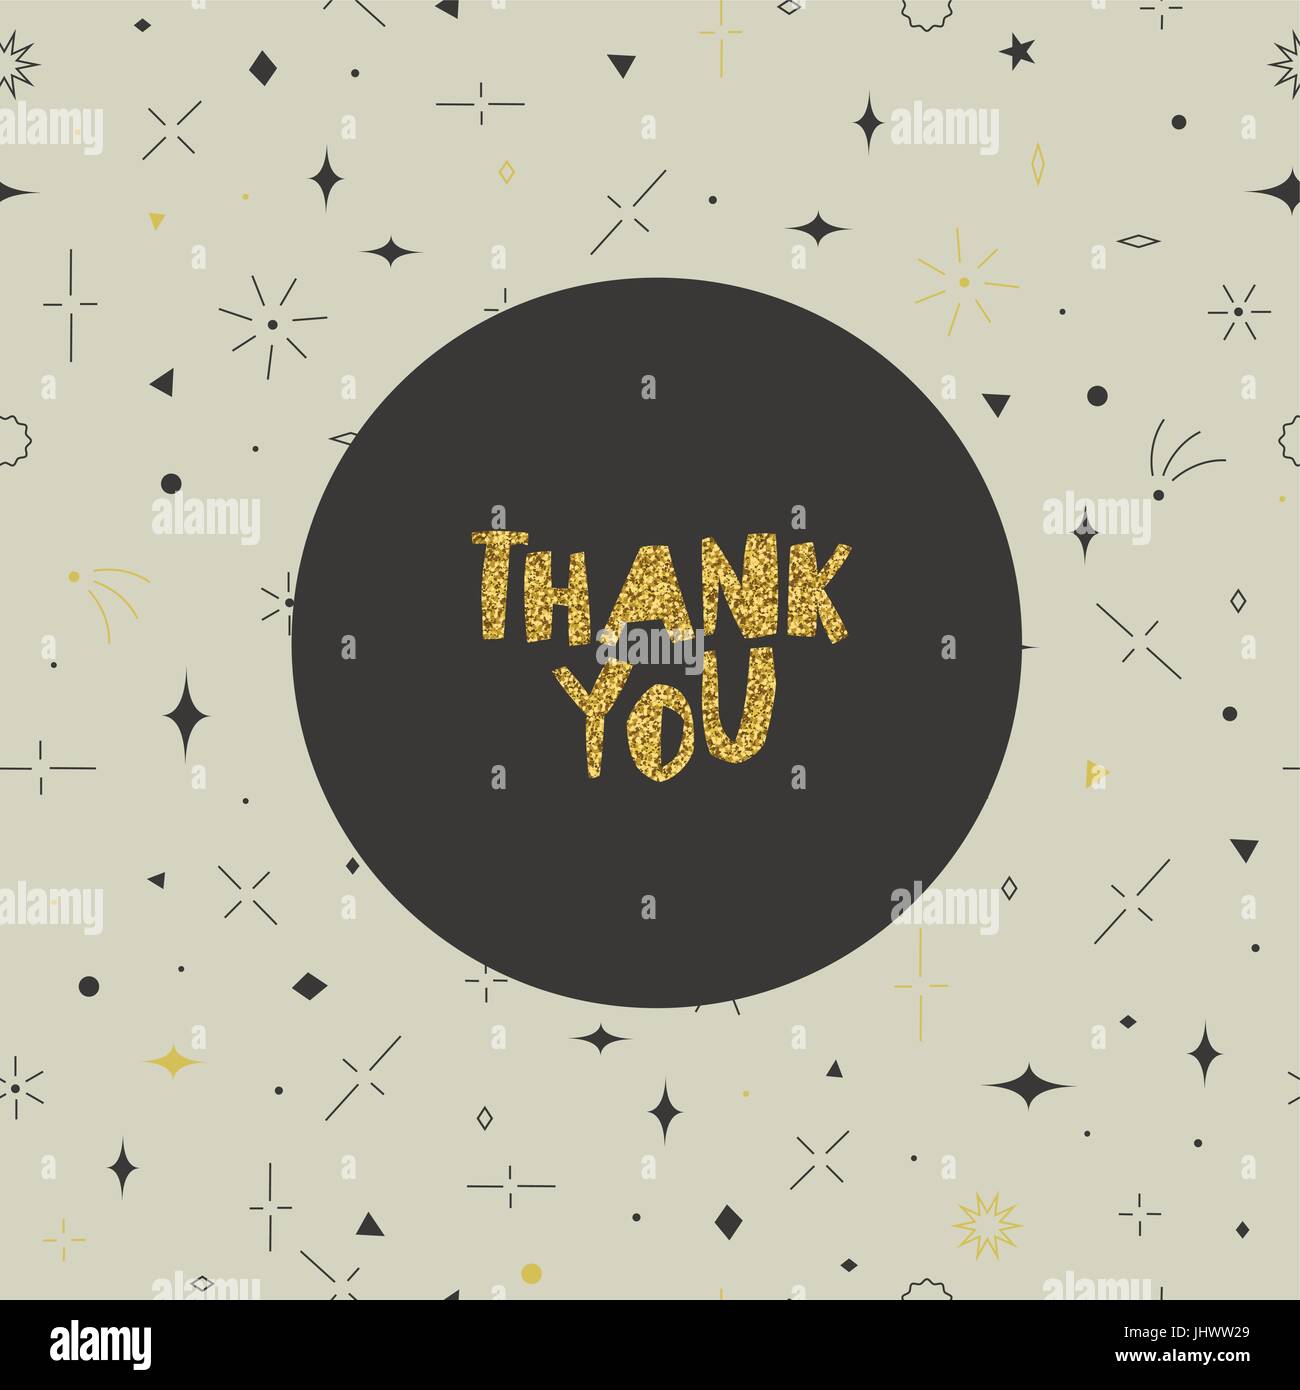 Thank you card. Geometric seamless pattern. Gold, gray and beige colors. Stars, squares, circles, triangles, rhombus and lines. Stock Vector